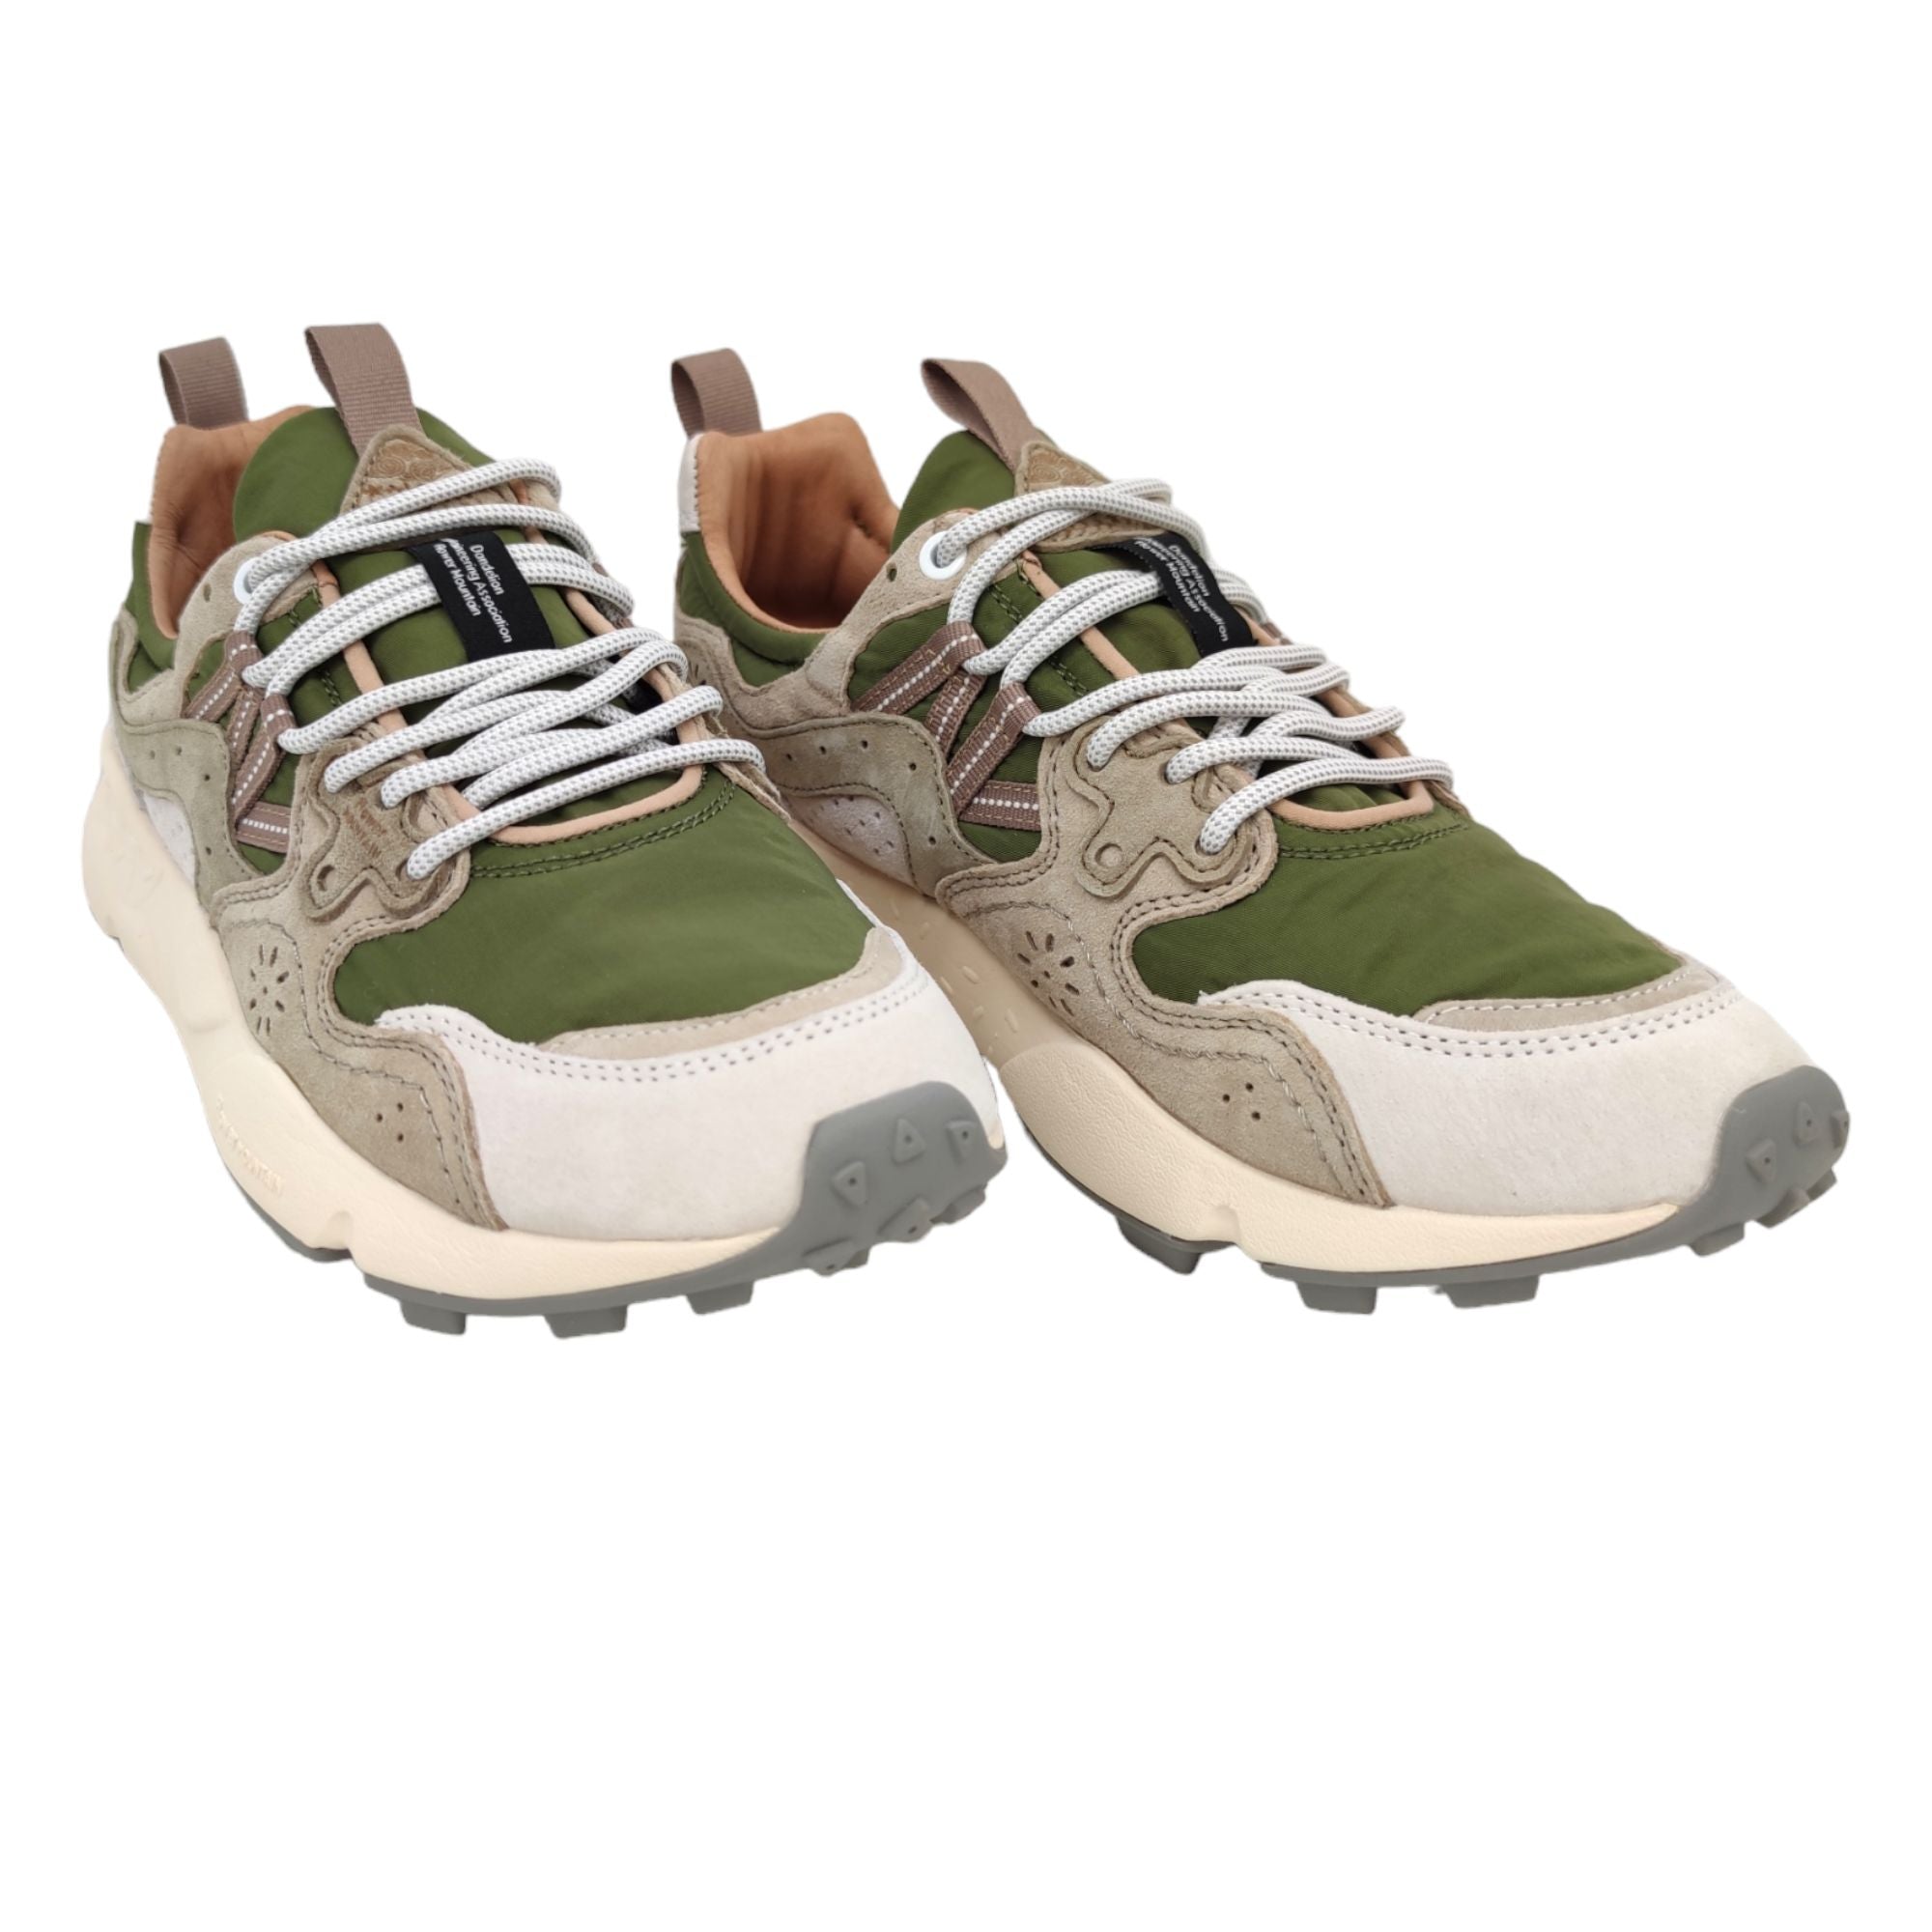 Men's Yamano 3 Shoes Off White/Military/Green 